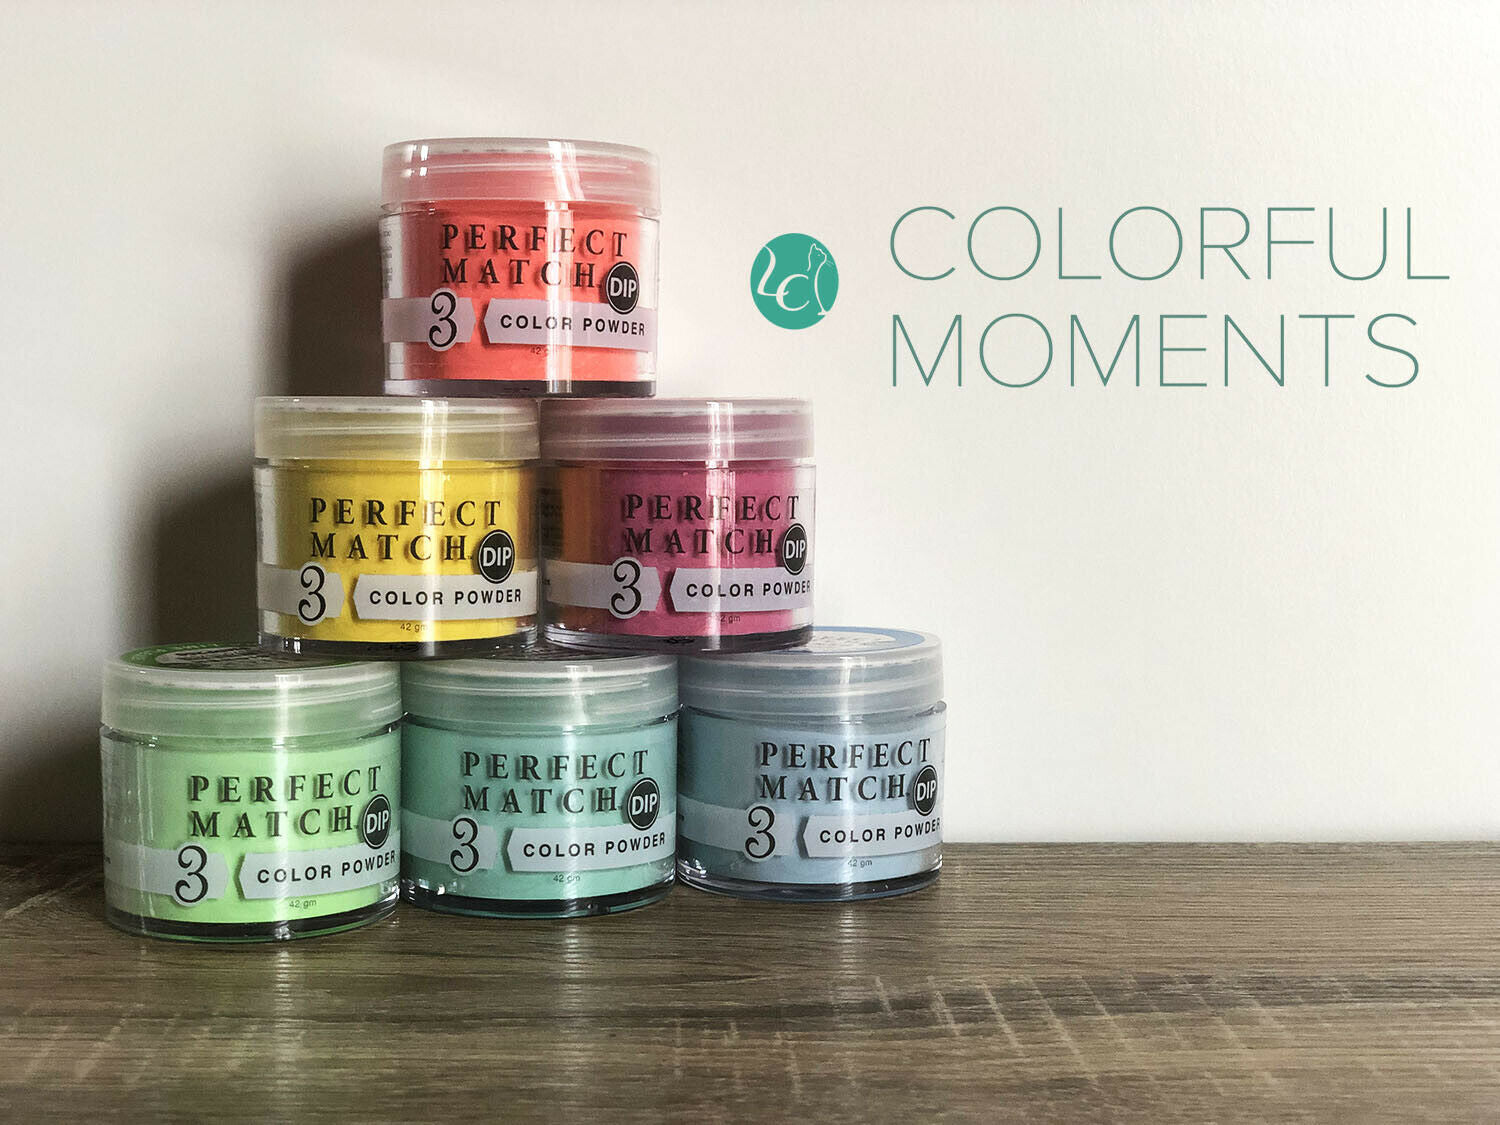 Perfect Match Dipping Powder, Colorful Moments Collection, 1.5oz, Full line of 6 colors (From PMDP253 to PMDP 258) OK0620VD